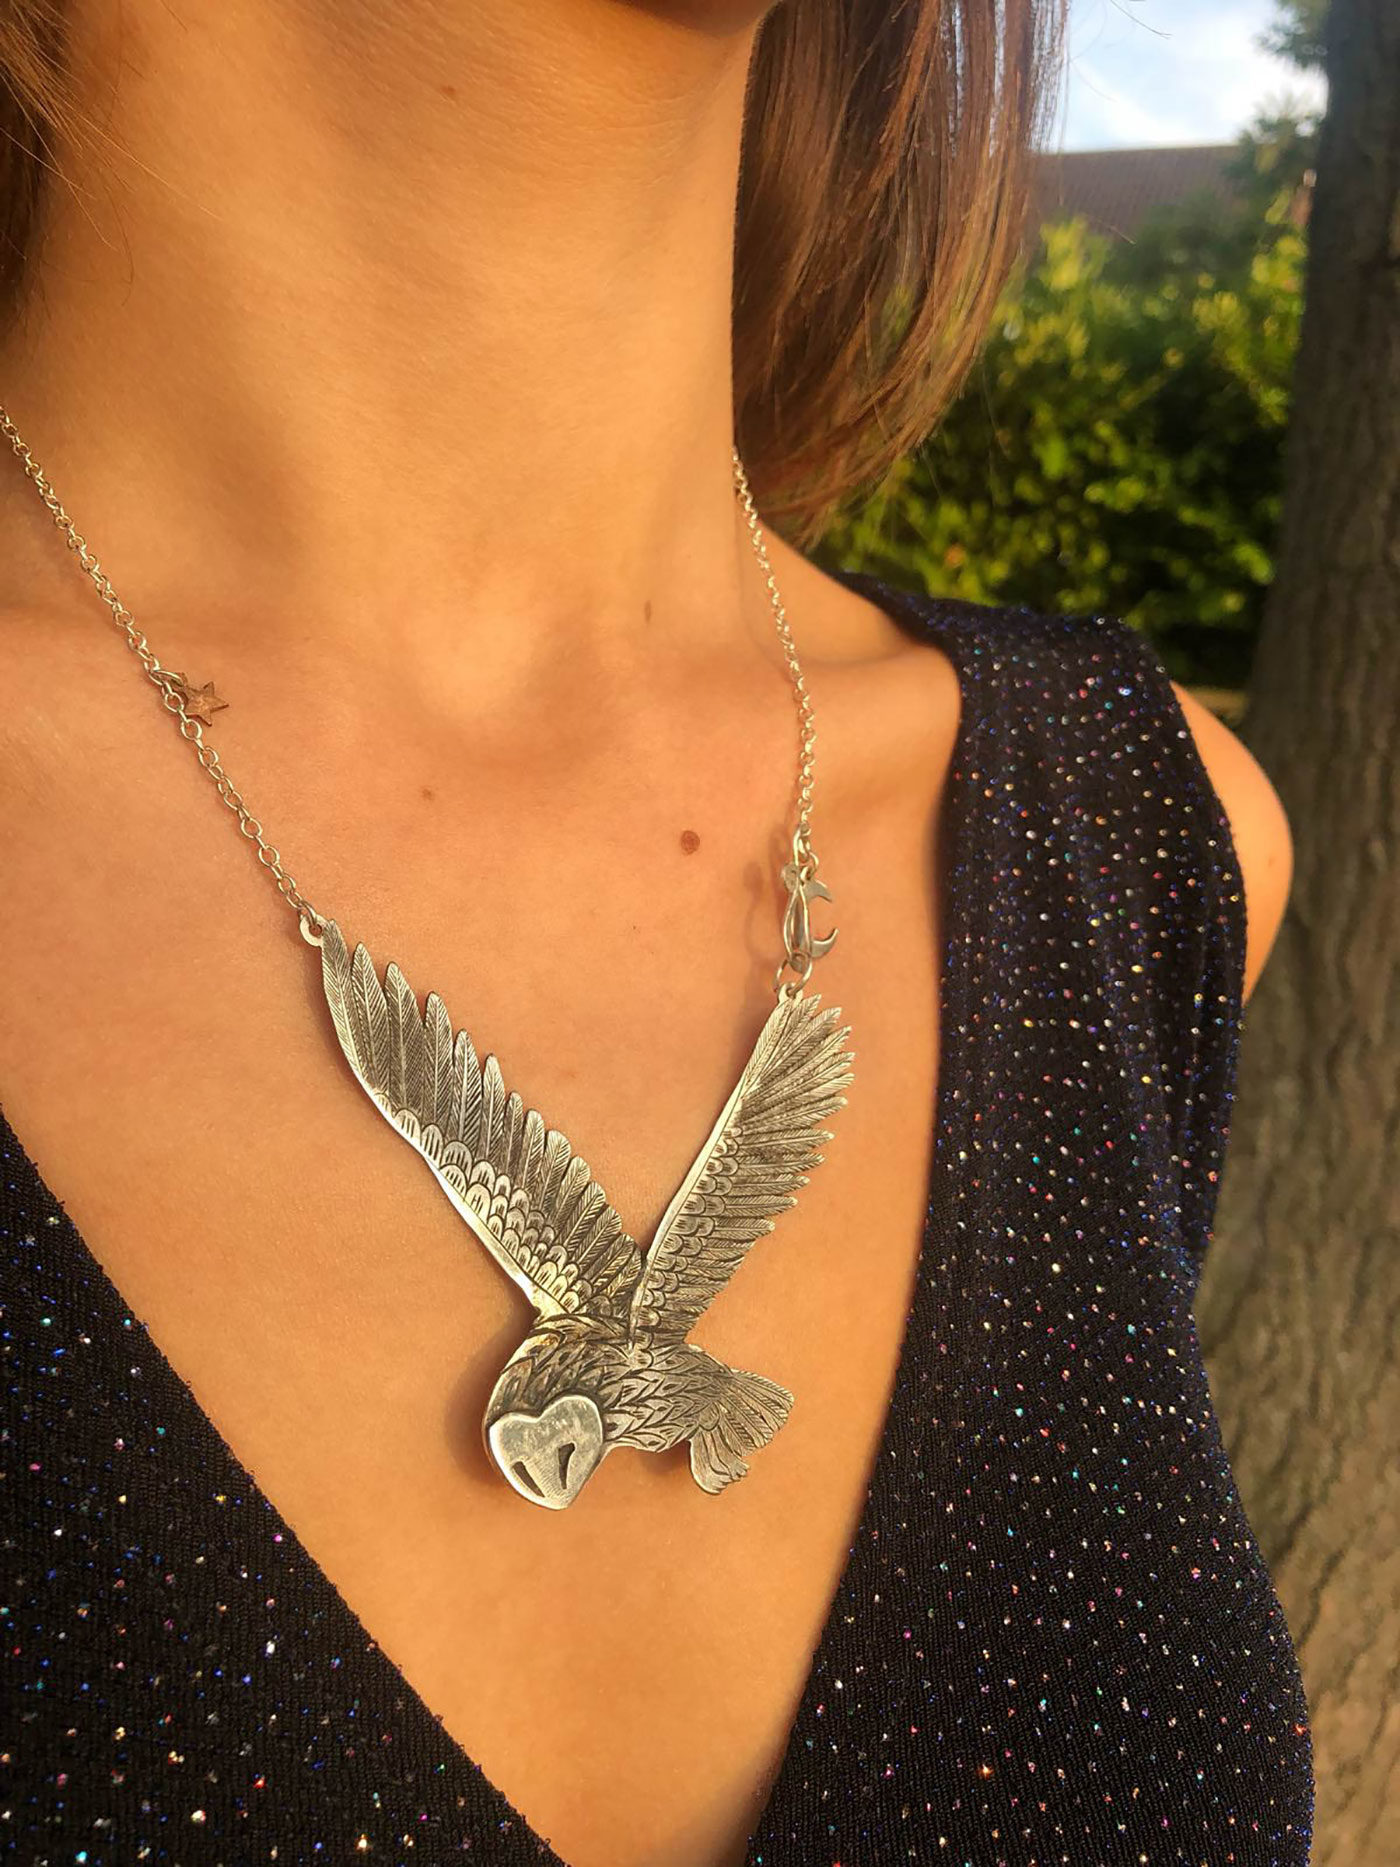 Owl jewellery - ethical handcrafted and recycled jewellery made by independent artisan workshop in Cambridge England